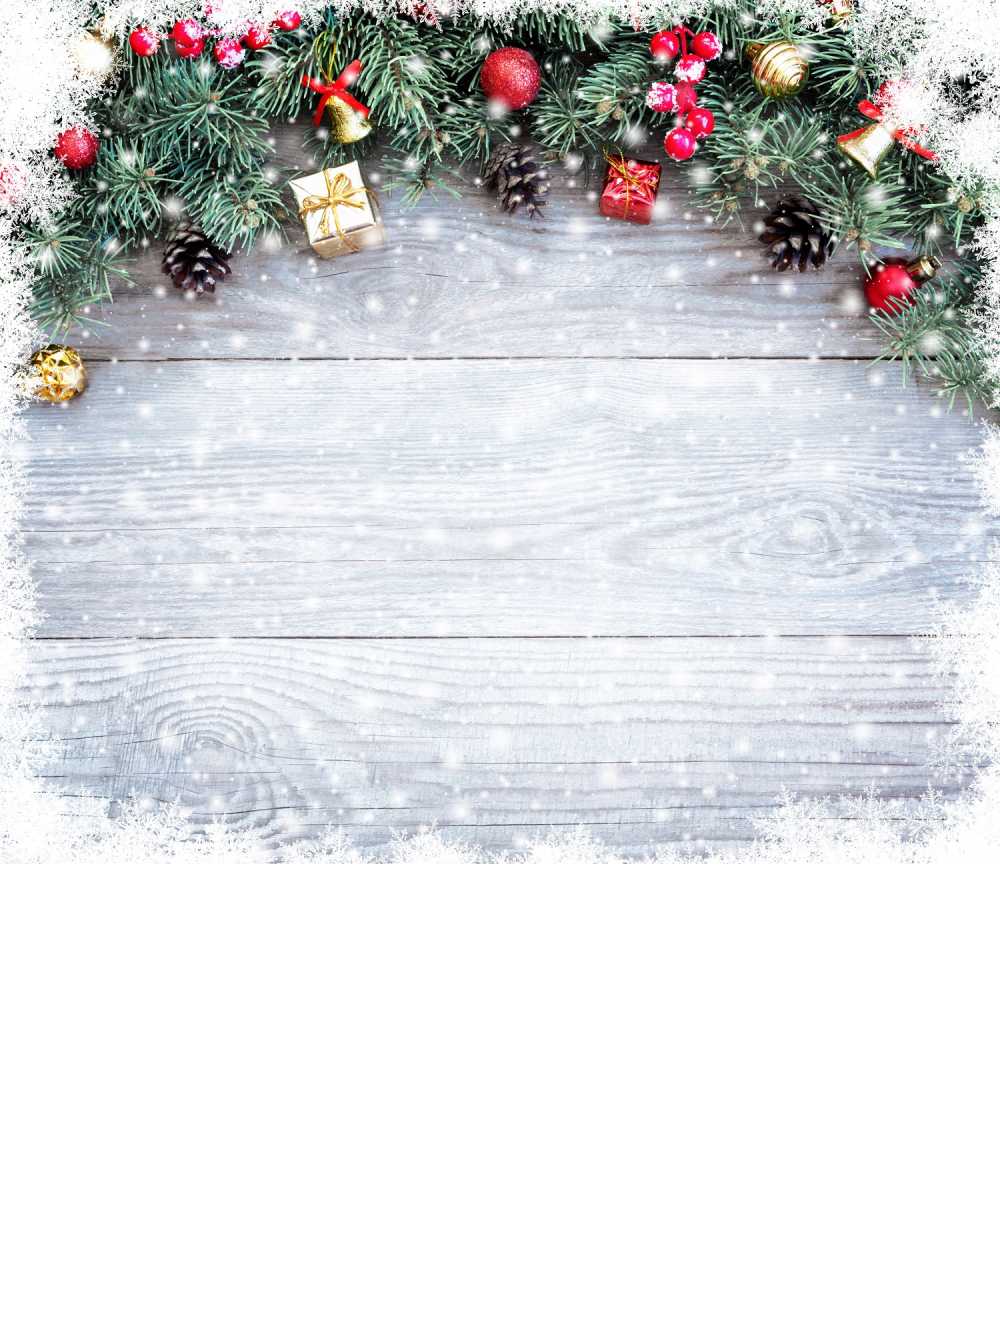 Christmas Wood Wall With Grand Fir Leaves Backdrop IBD-246875 size:1.5x2